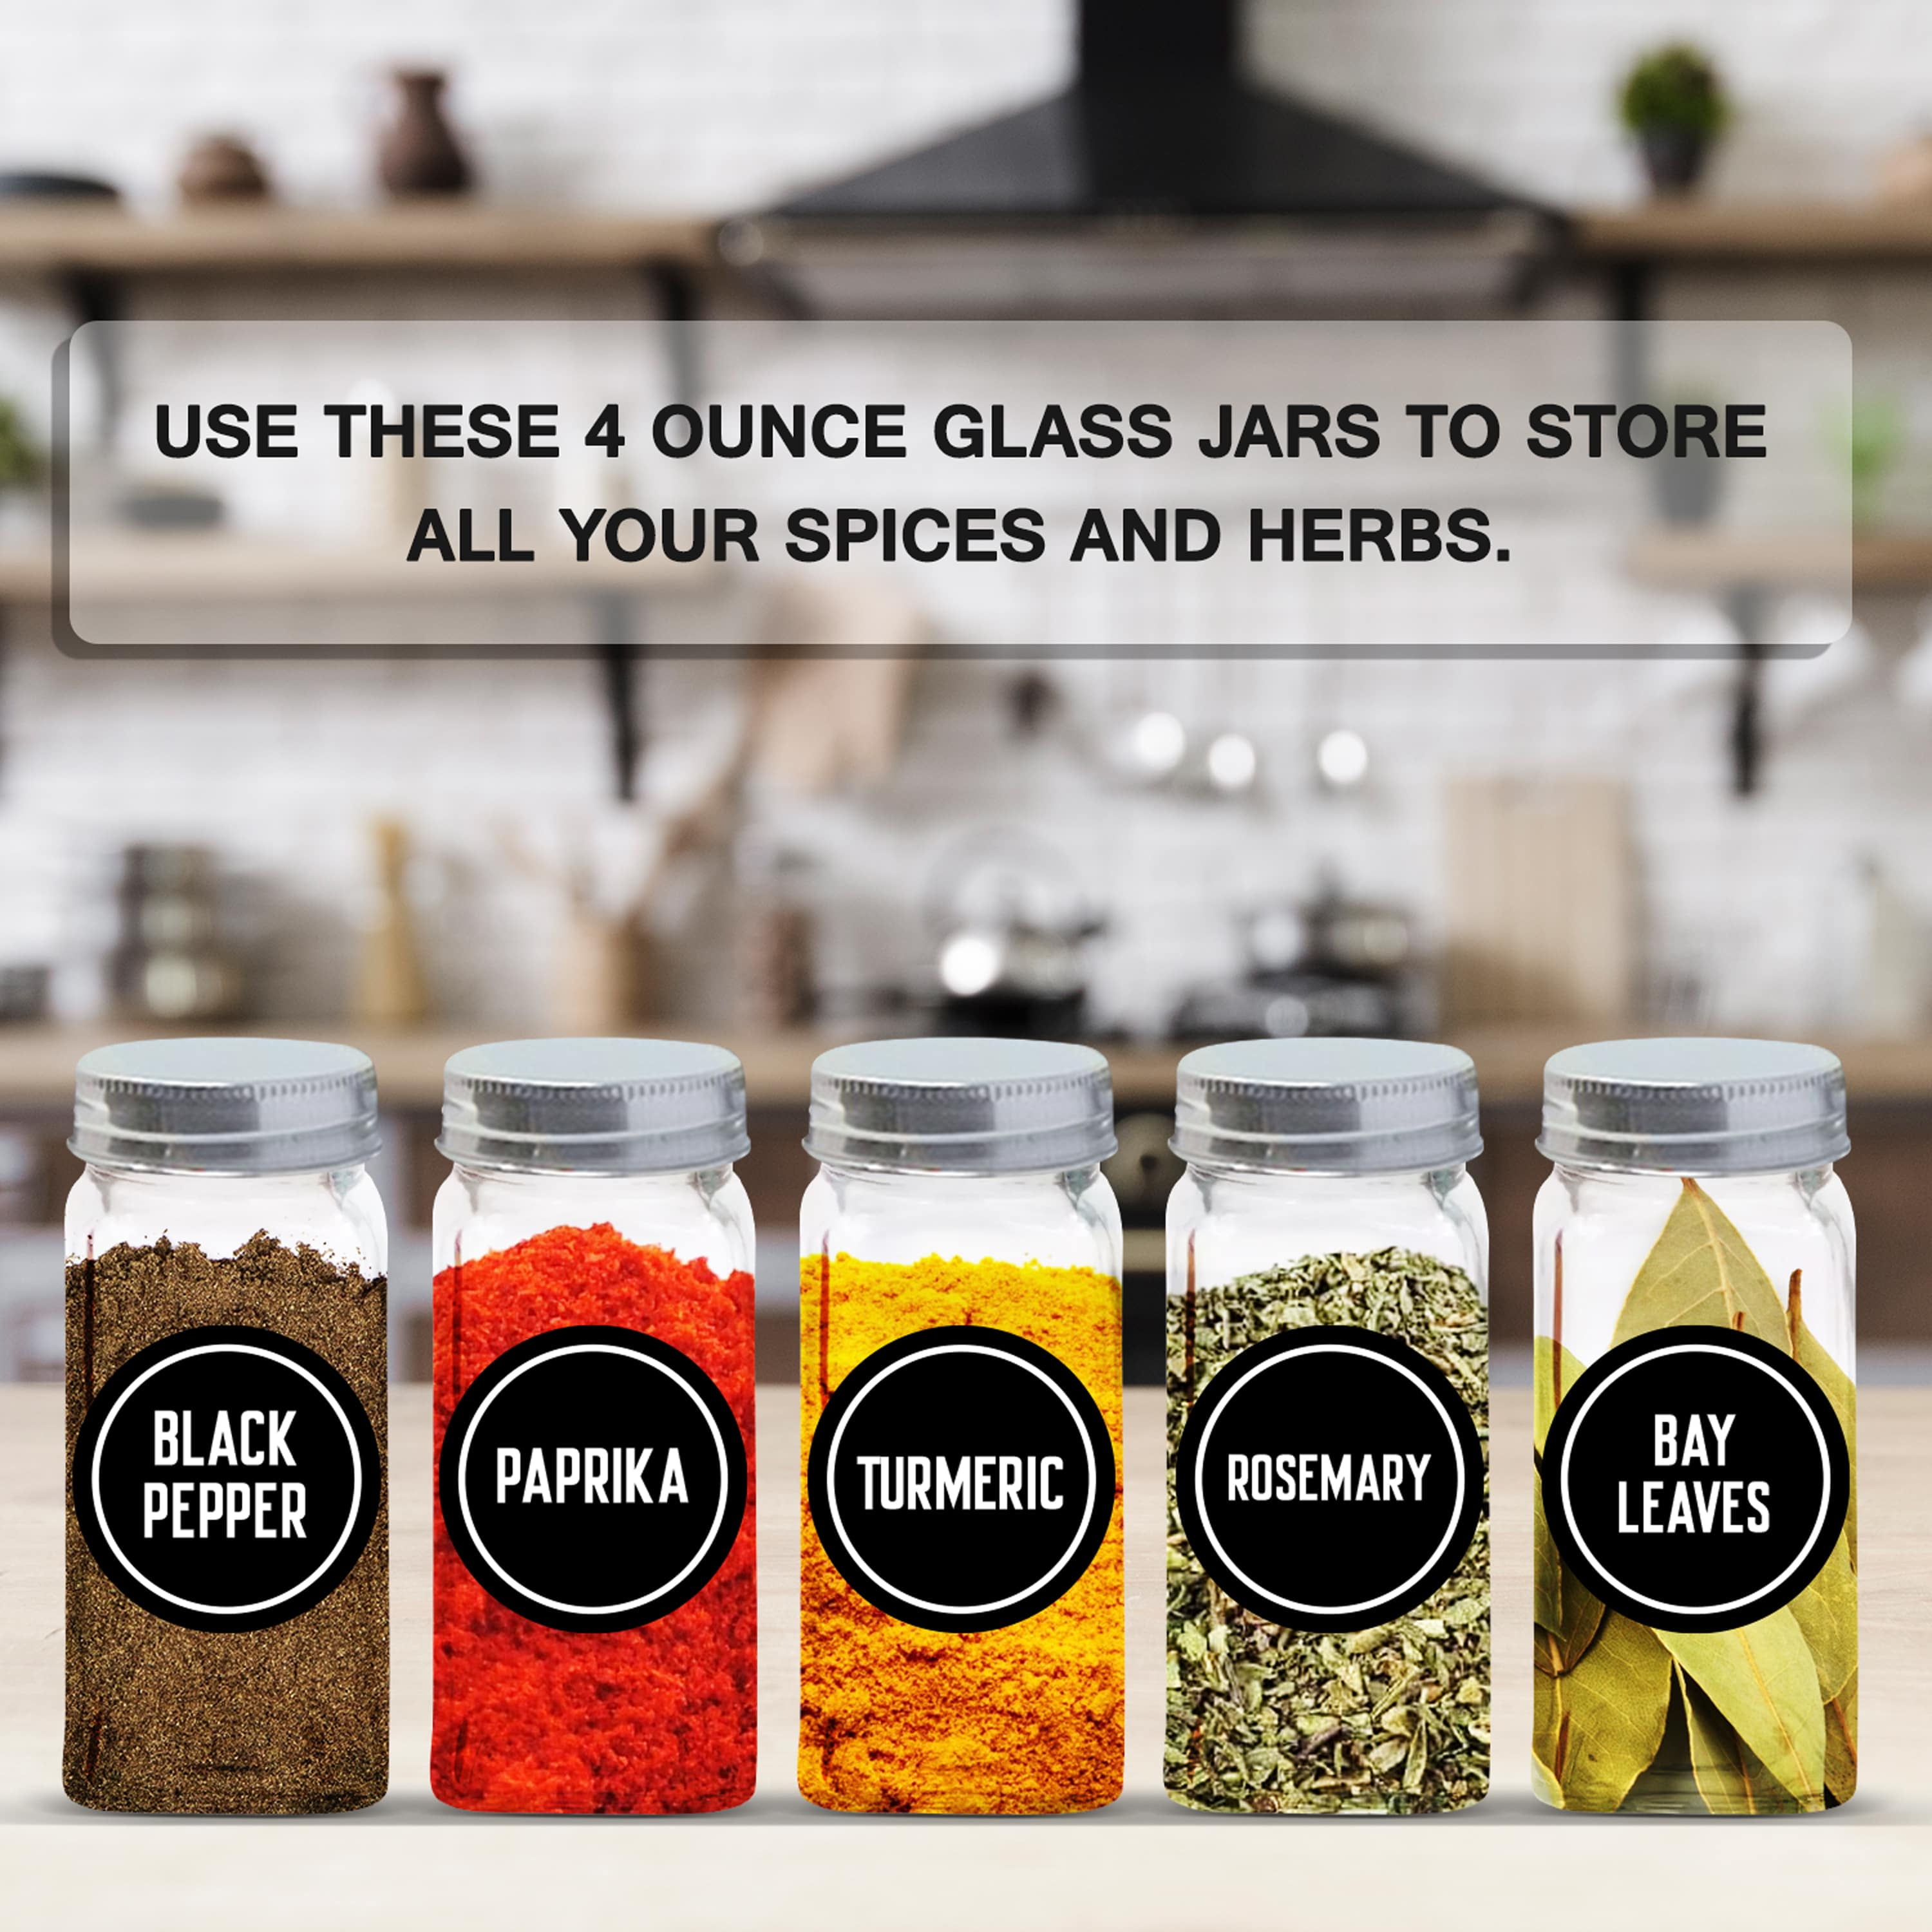 4 oz Square Spice Jar with Shaker Insert - Whisk